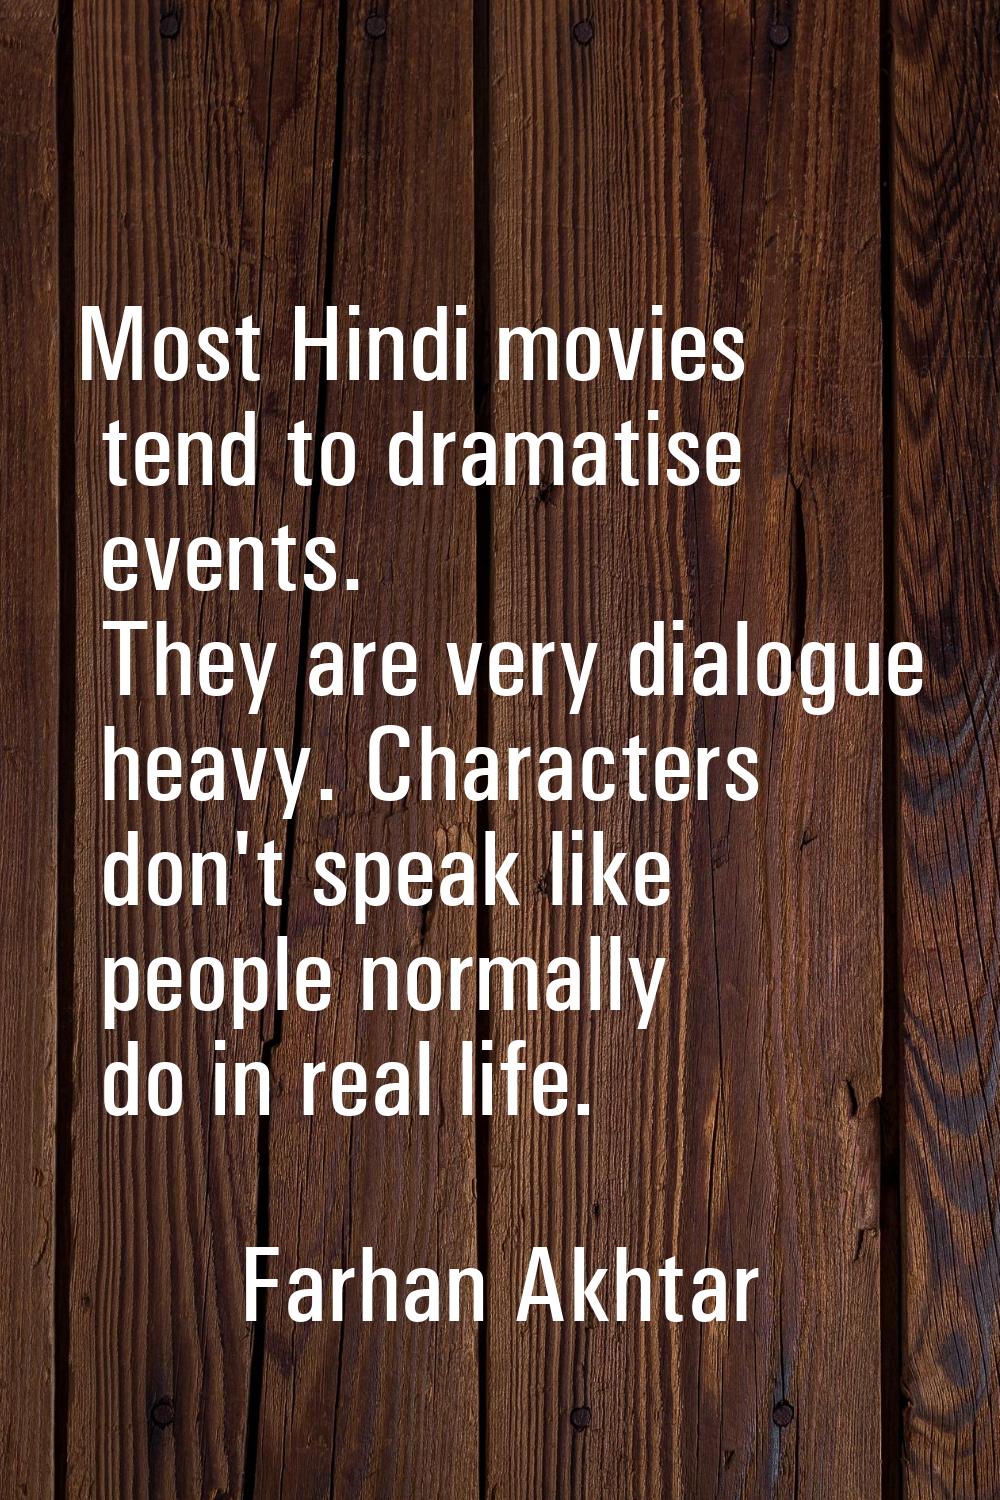 Most Hindi movies tend to dramatise events. They are very dialogue heavy. Characters don't speak li